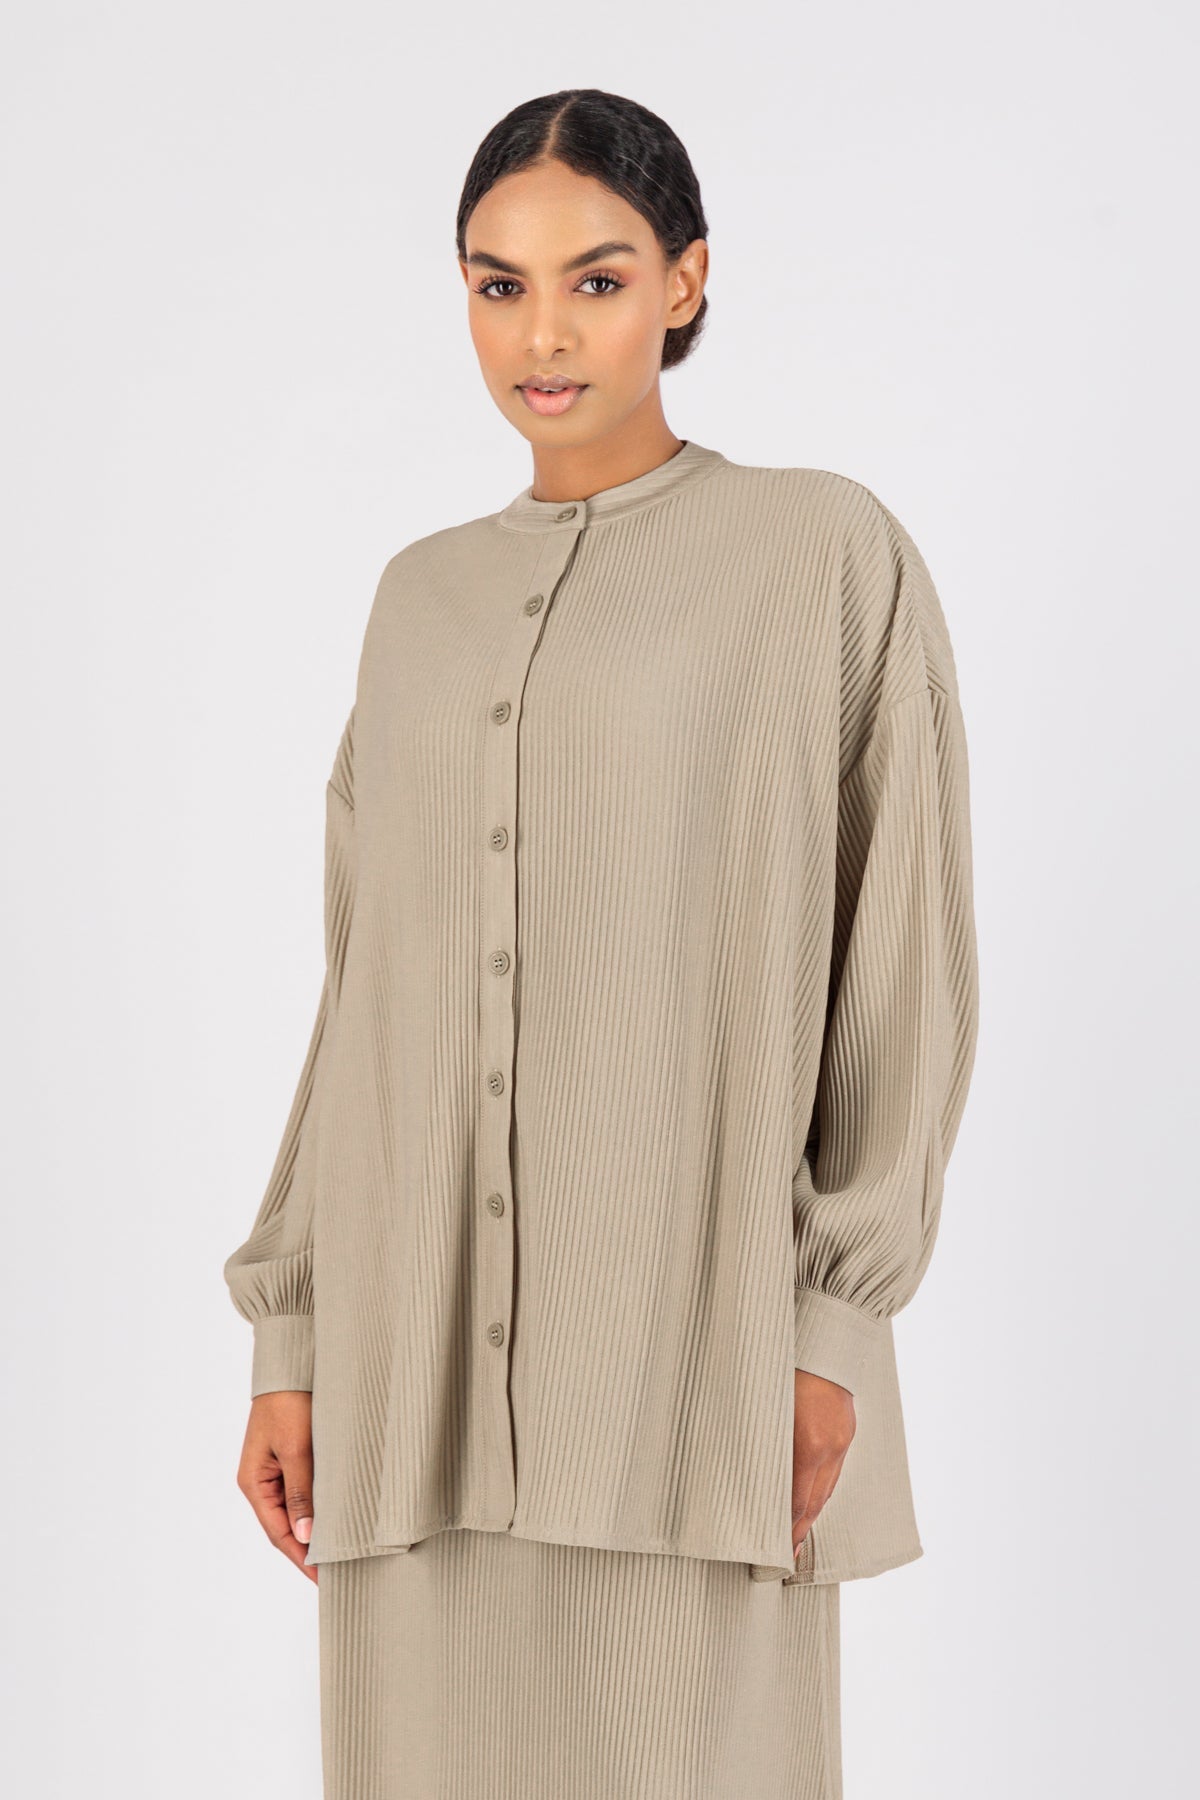 CA - Pleated Button Up - Natural